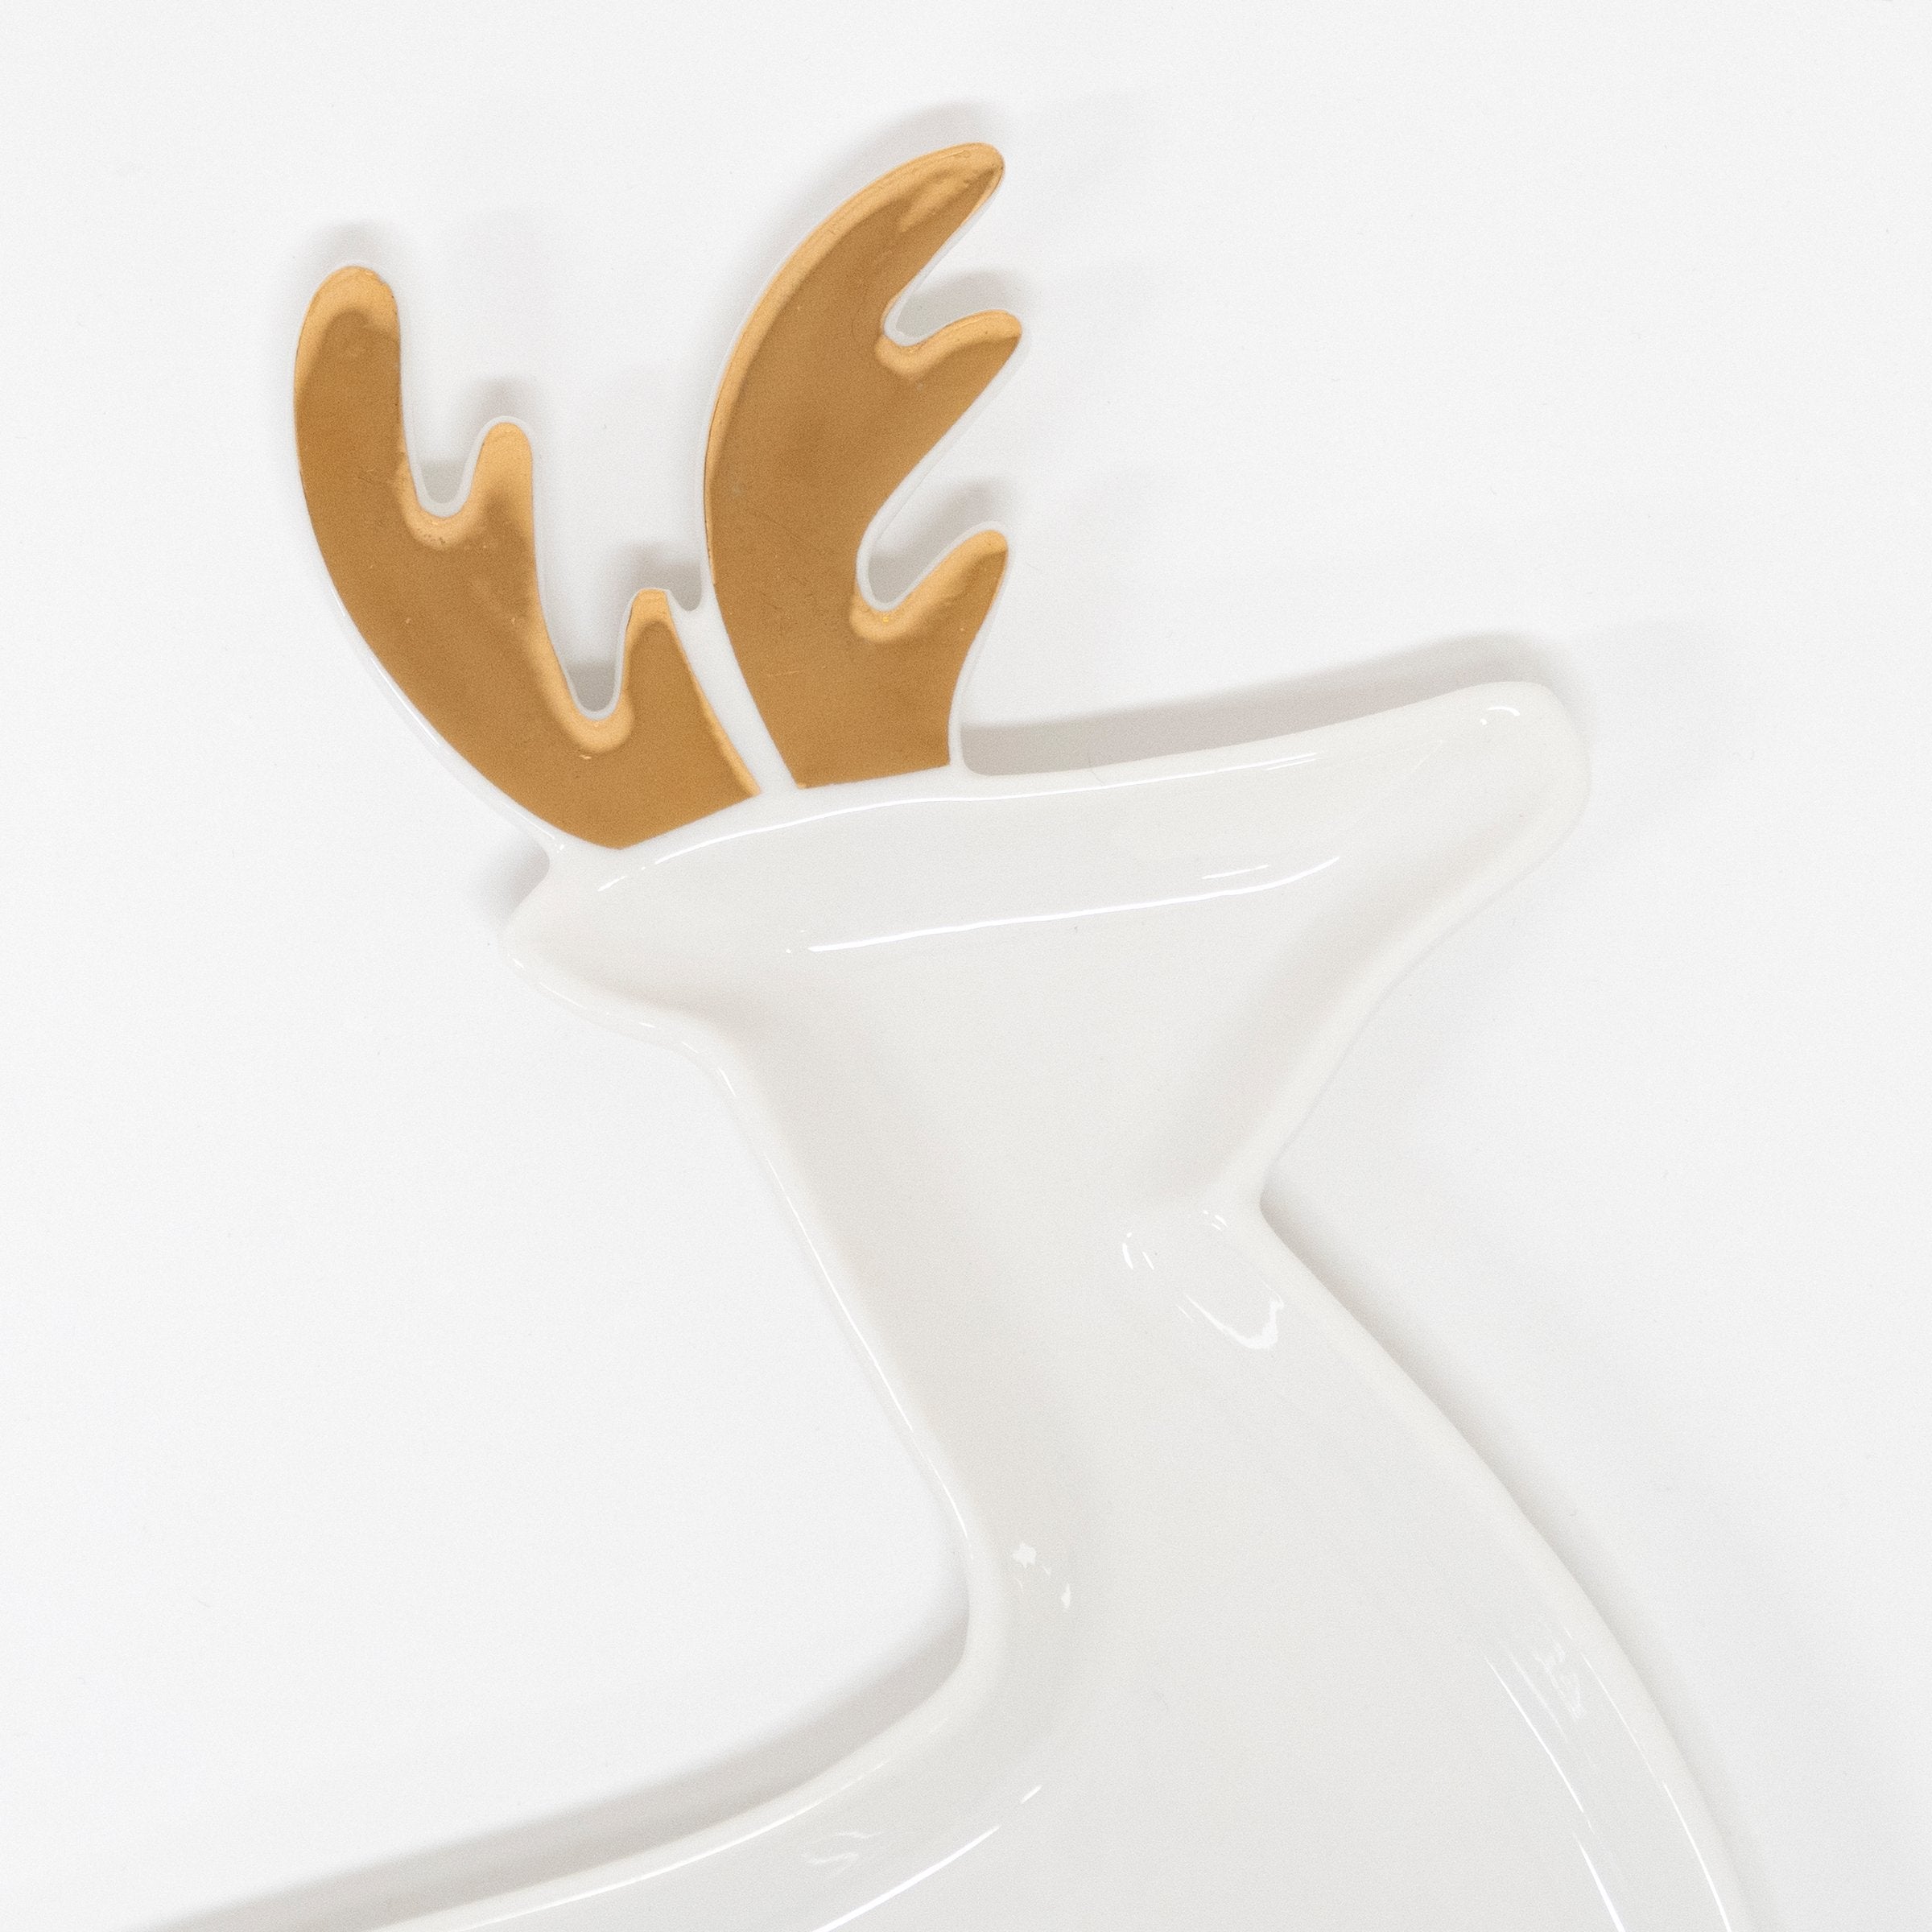 Our ceramic reindeer plates, with gold foil detail, are perfect for your Christmas party.